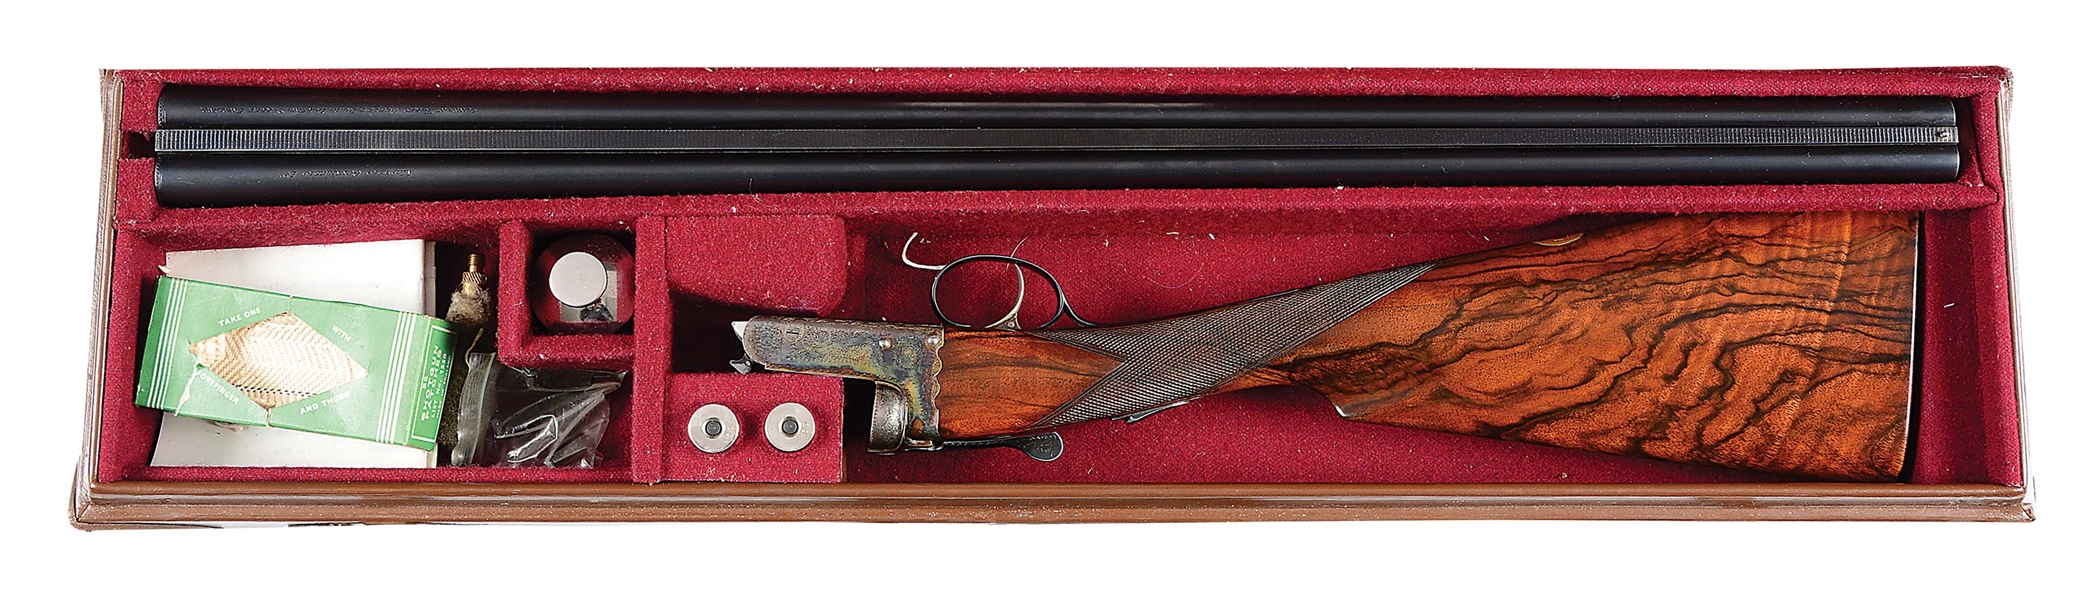 (M) RARE AND HISTORIC MASTERS GUNMAKERS LTD. BOXLOCK EJECTOR SINGLE TRIGGER "REGAL" GRADE LIGHT GAME GUN SPECIALLY MADE FOR LOU DECOLATOR, PICTURED IN CHURCHILL BOOK BY DON MASTERS WITH CASE.